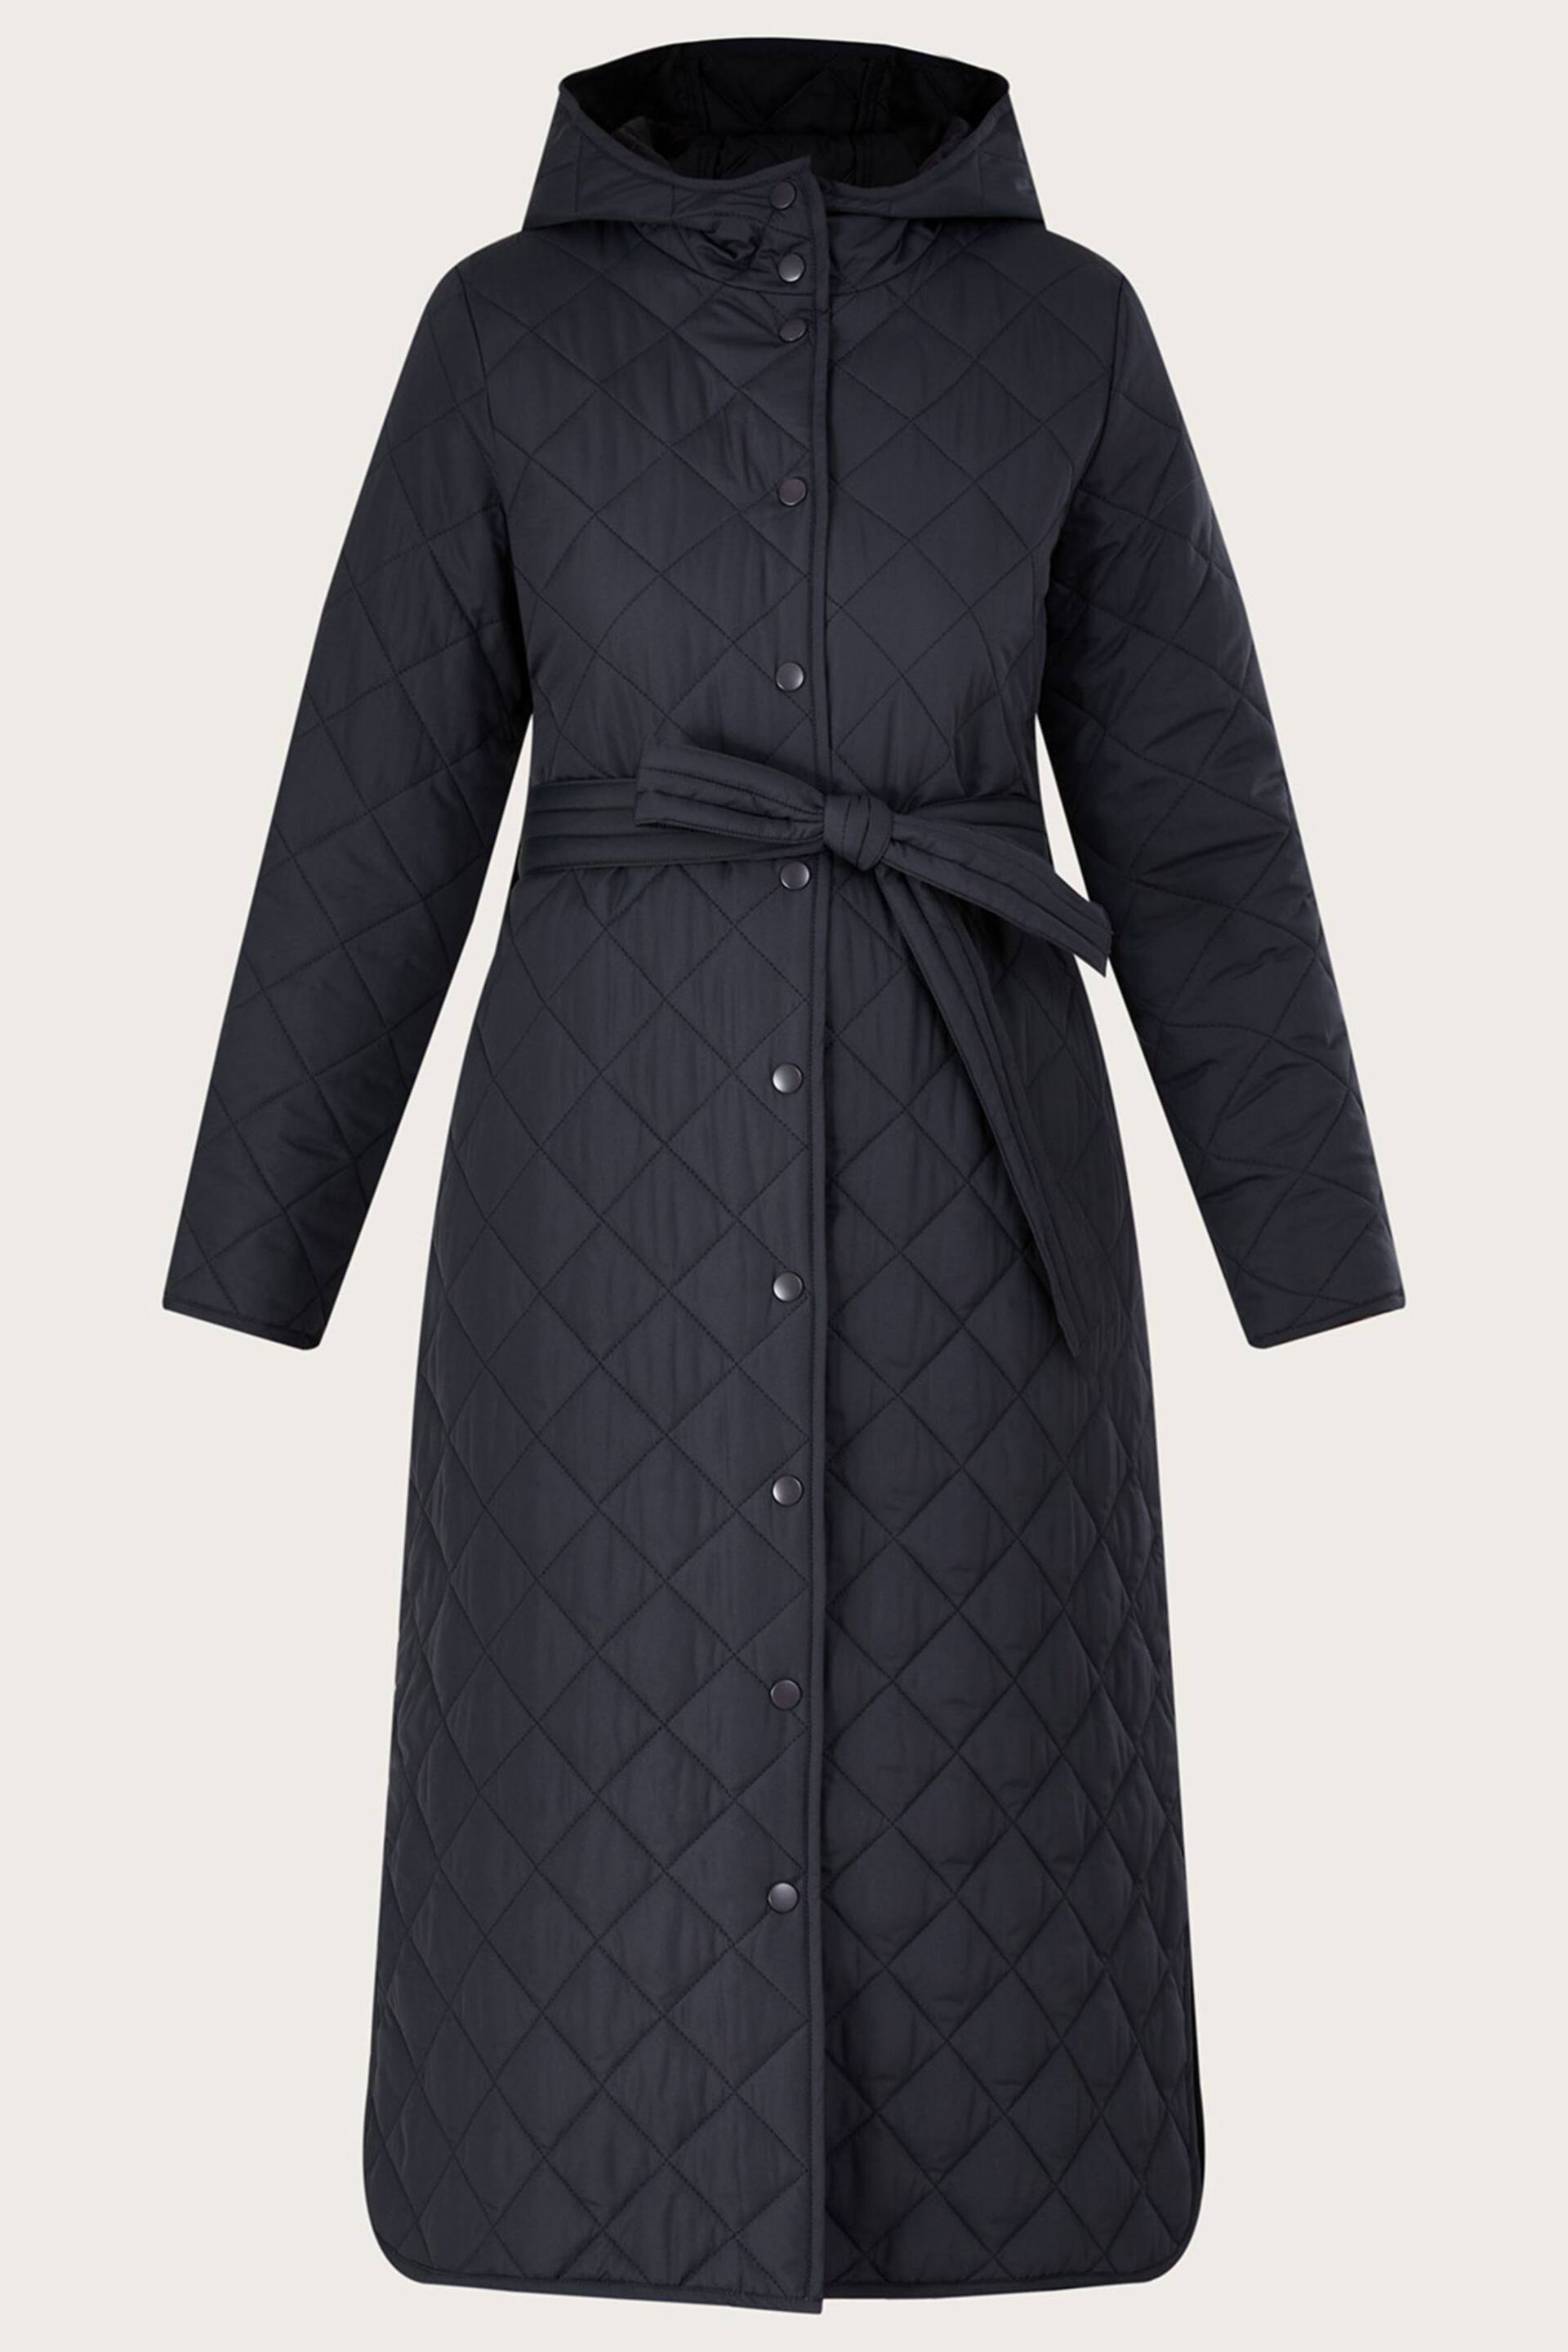 Monsoon Grey Quinn Quilted Hooded Longline Coat in Recycled Polyester - Image 4 of 4